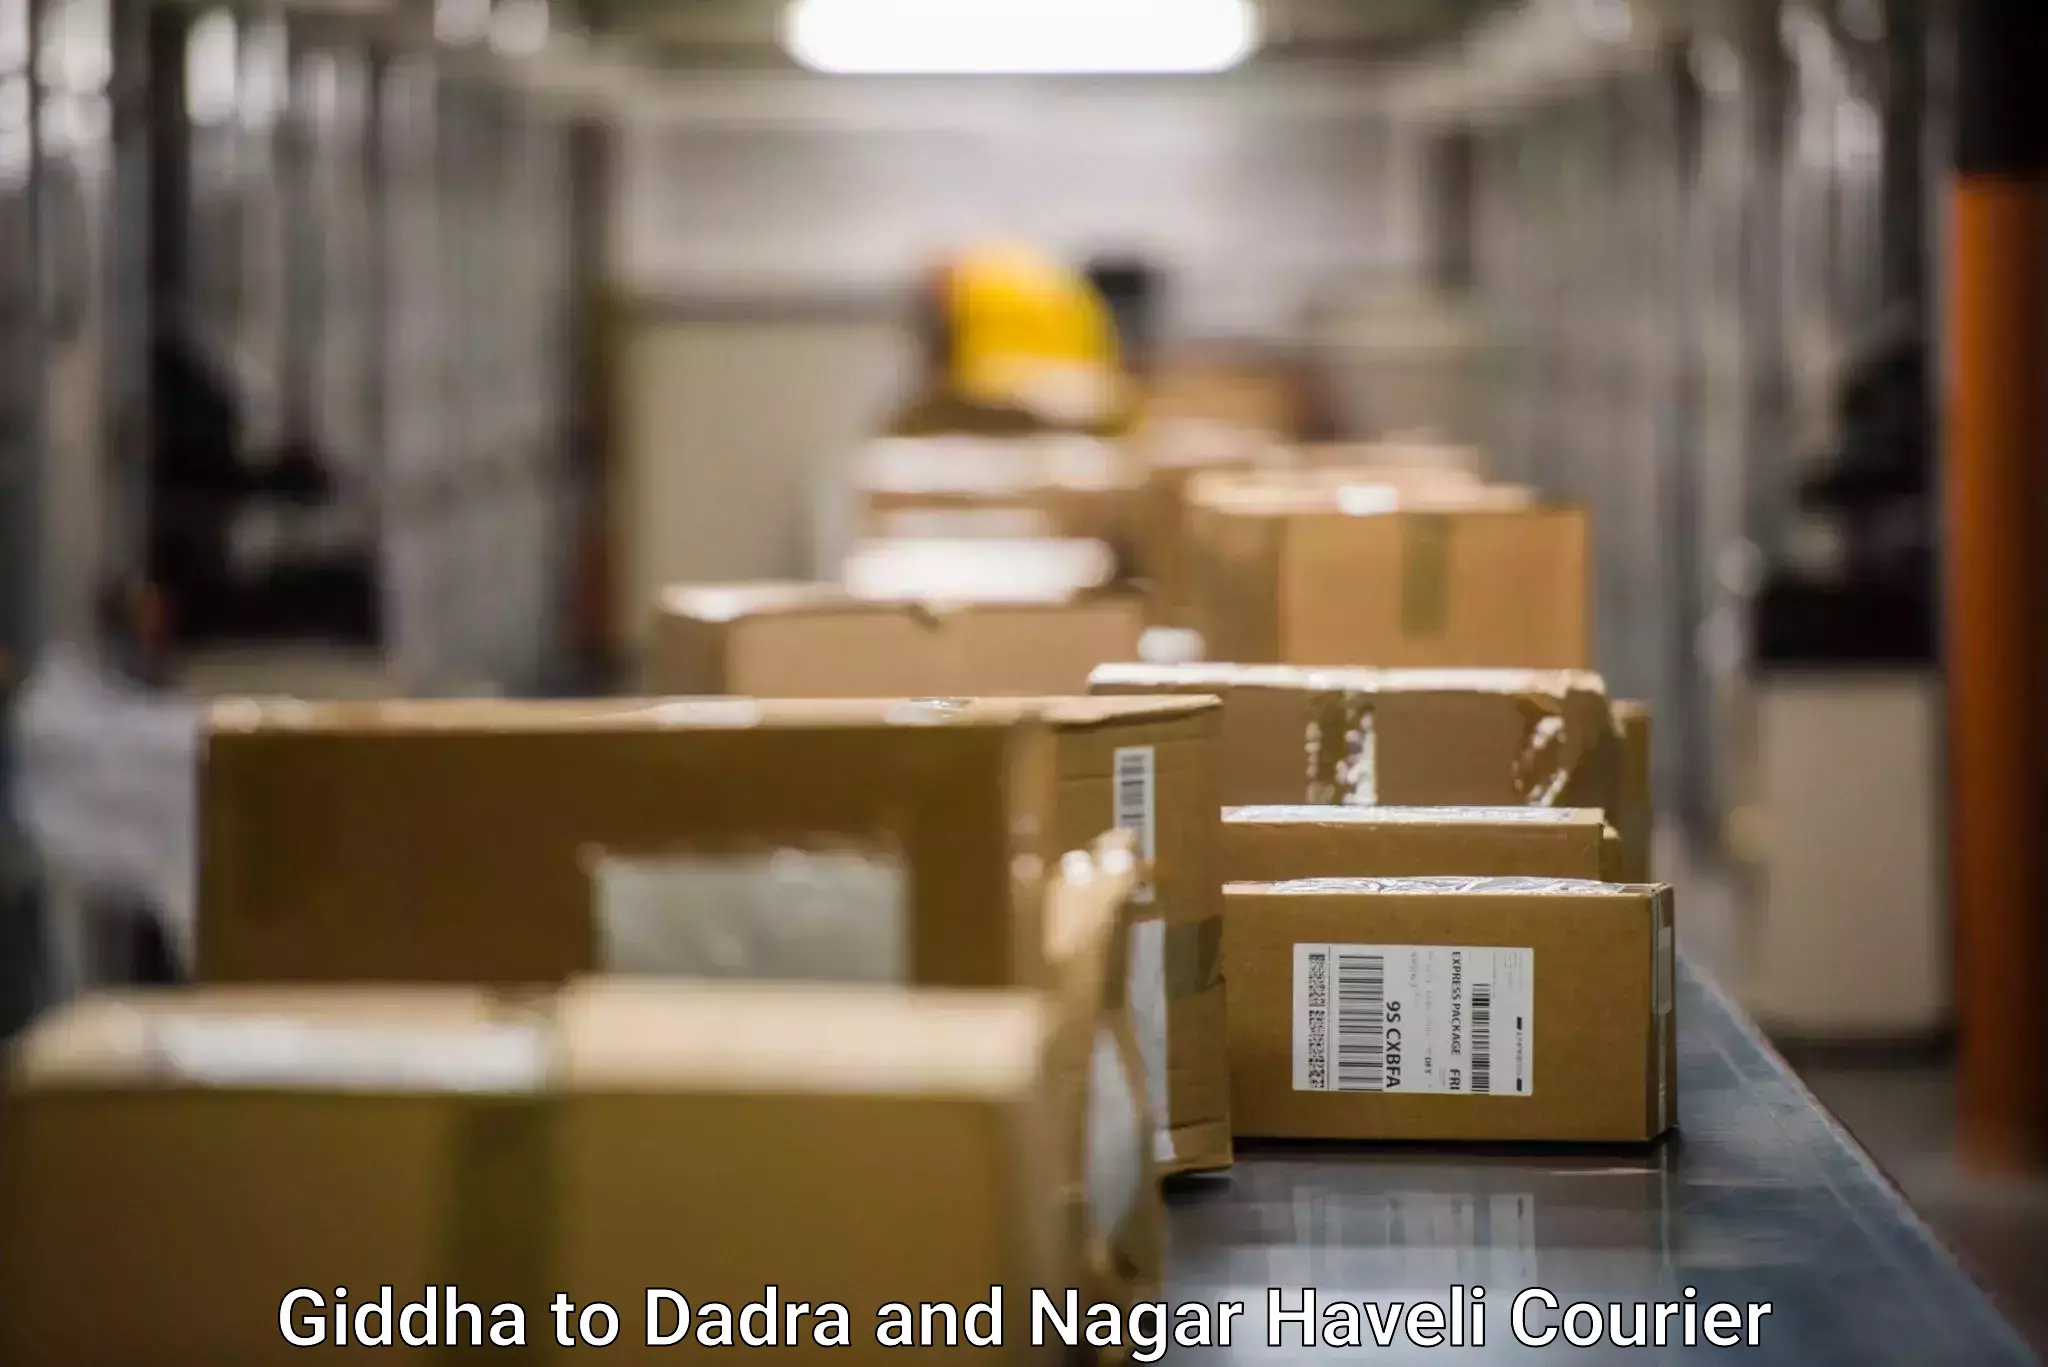 Personal parcel delivery in Giddha to Dadra and Nagar Haveli